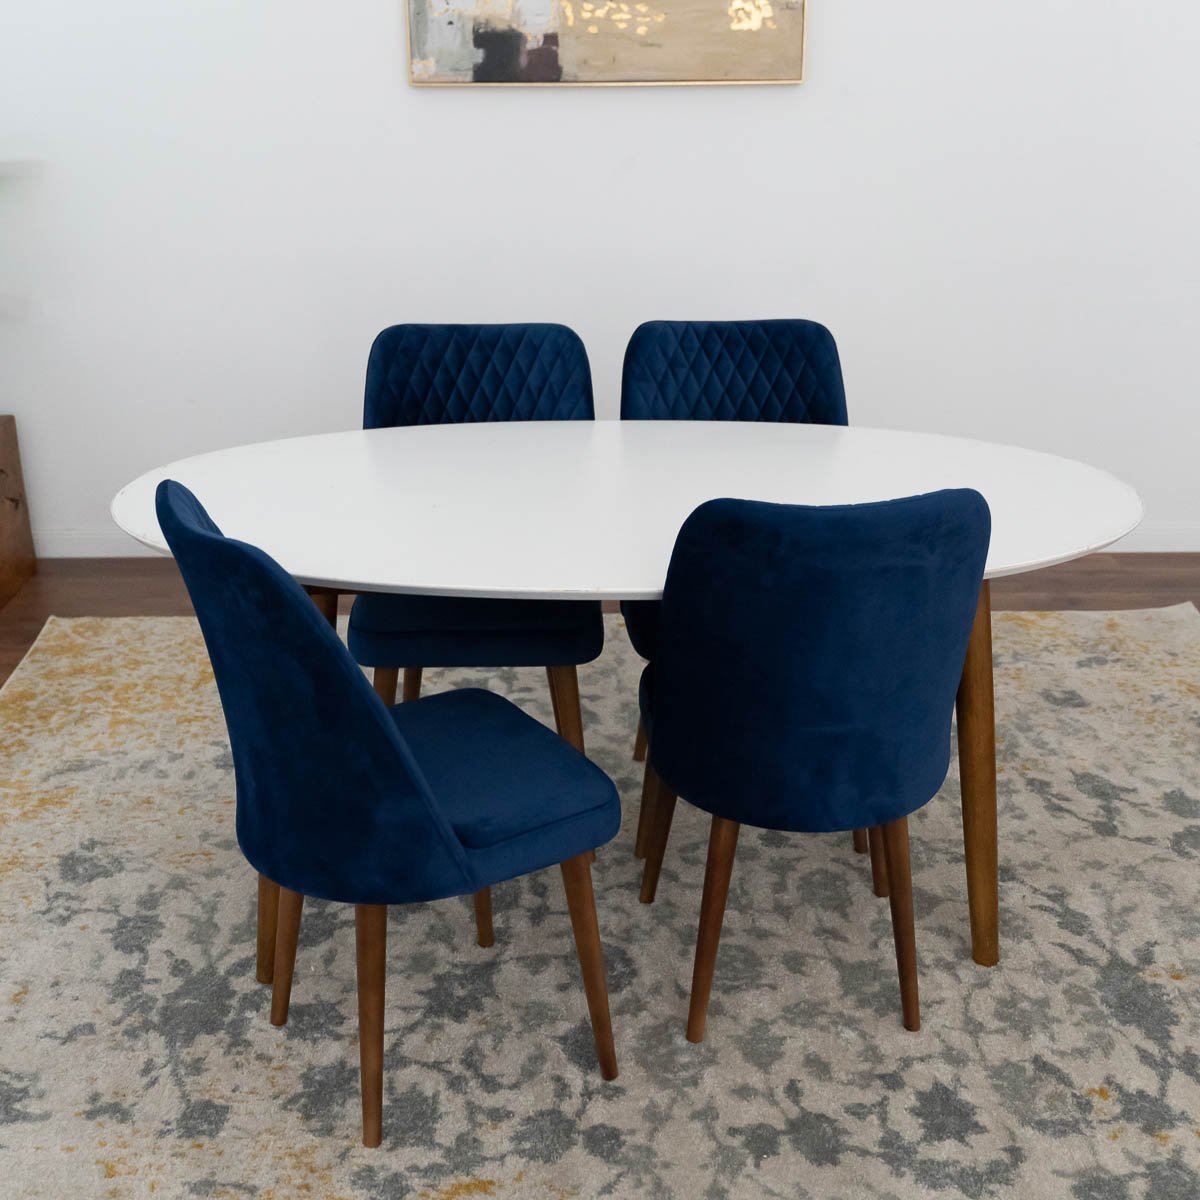 Rixos Dining set with Blue Dining Chairs | Mid in Mod | Houston TX | Best Furniture stores in Houston